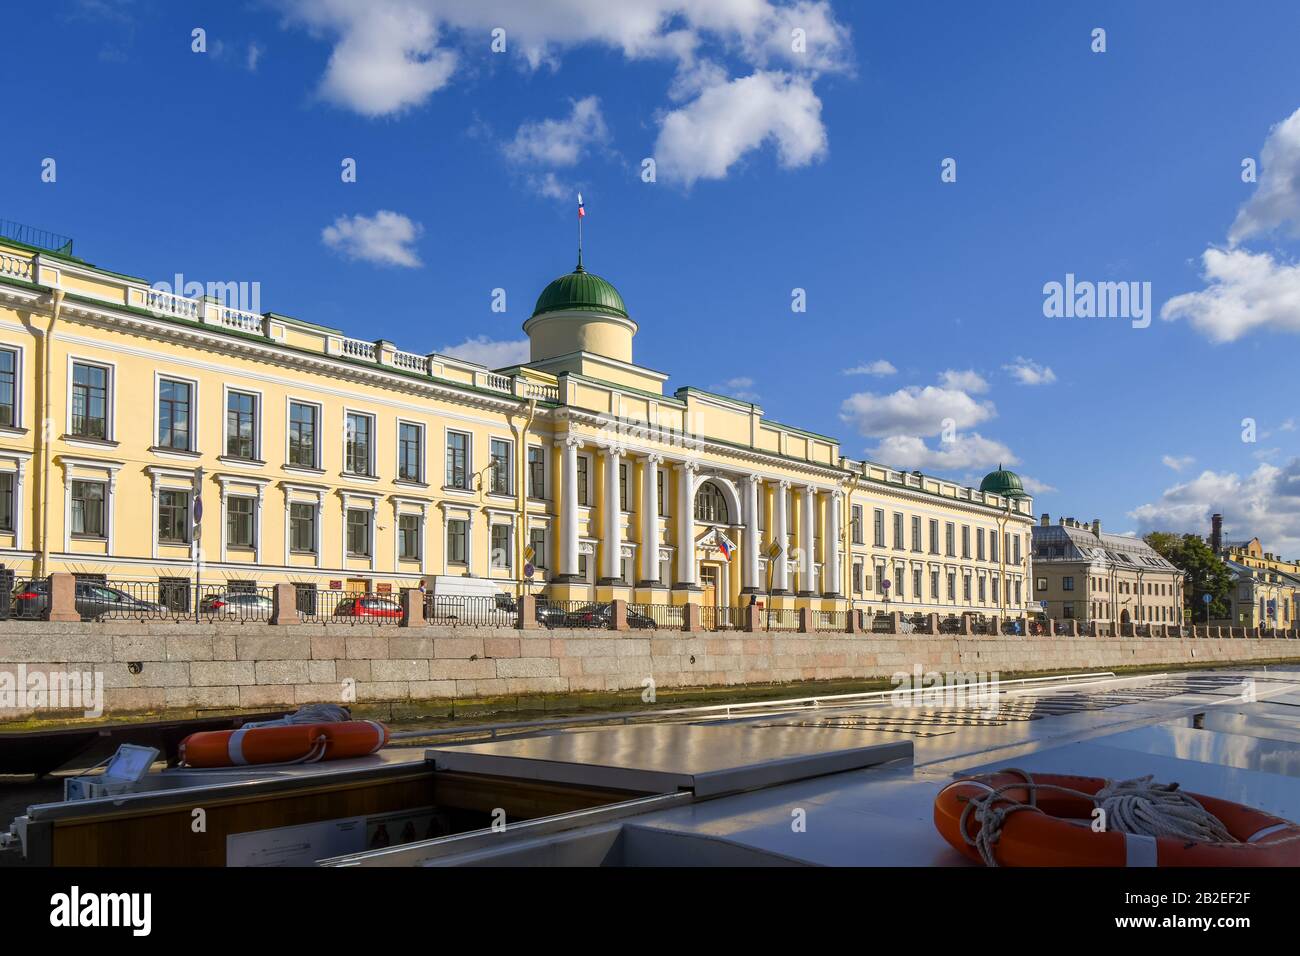 View of the Imperial School of Jurisprudence from a tourist cruise boat on the rivers and canals of Saint Petersburg, Russia. Stock Photo